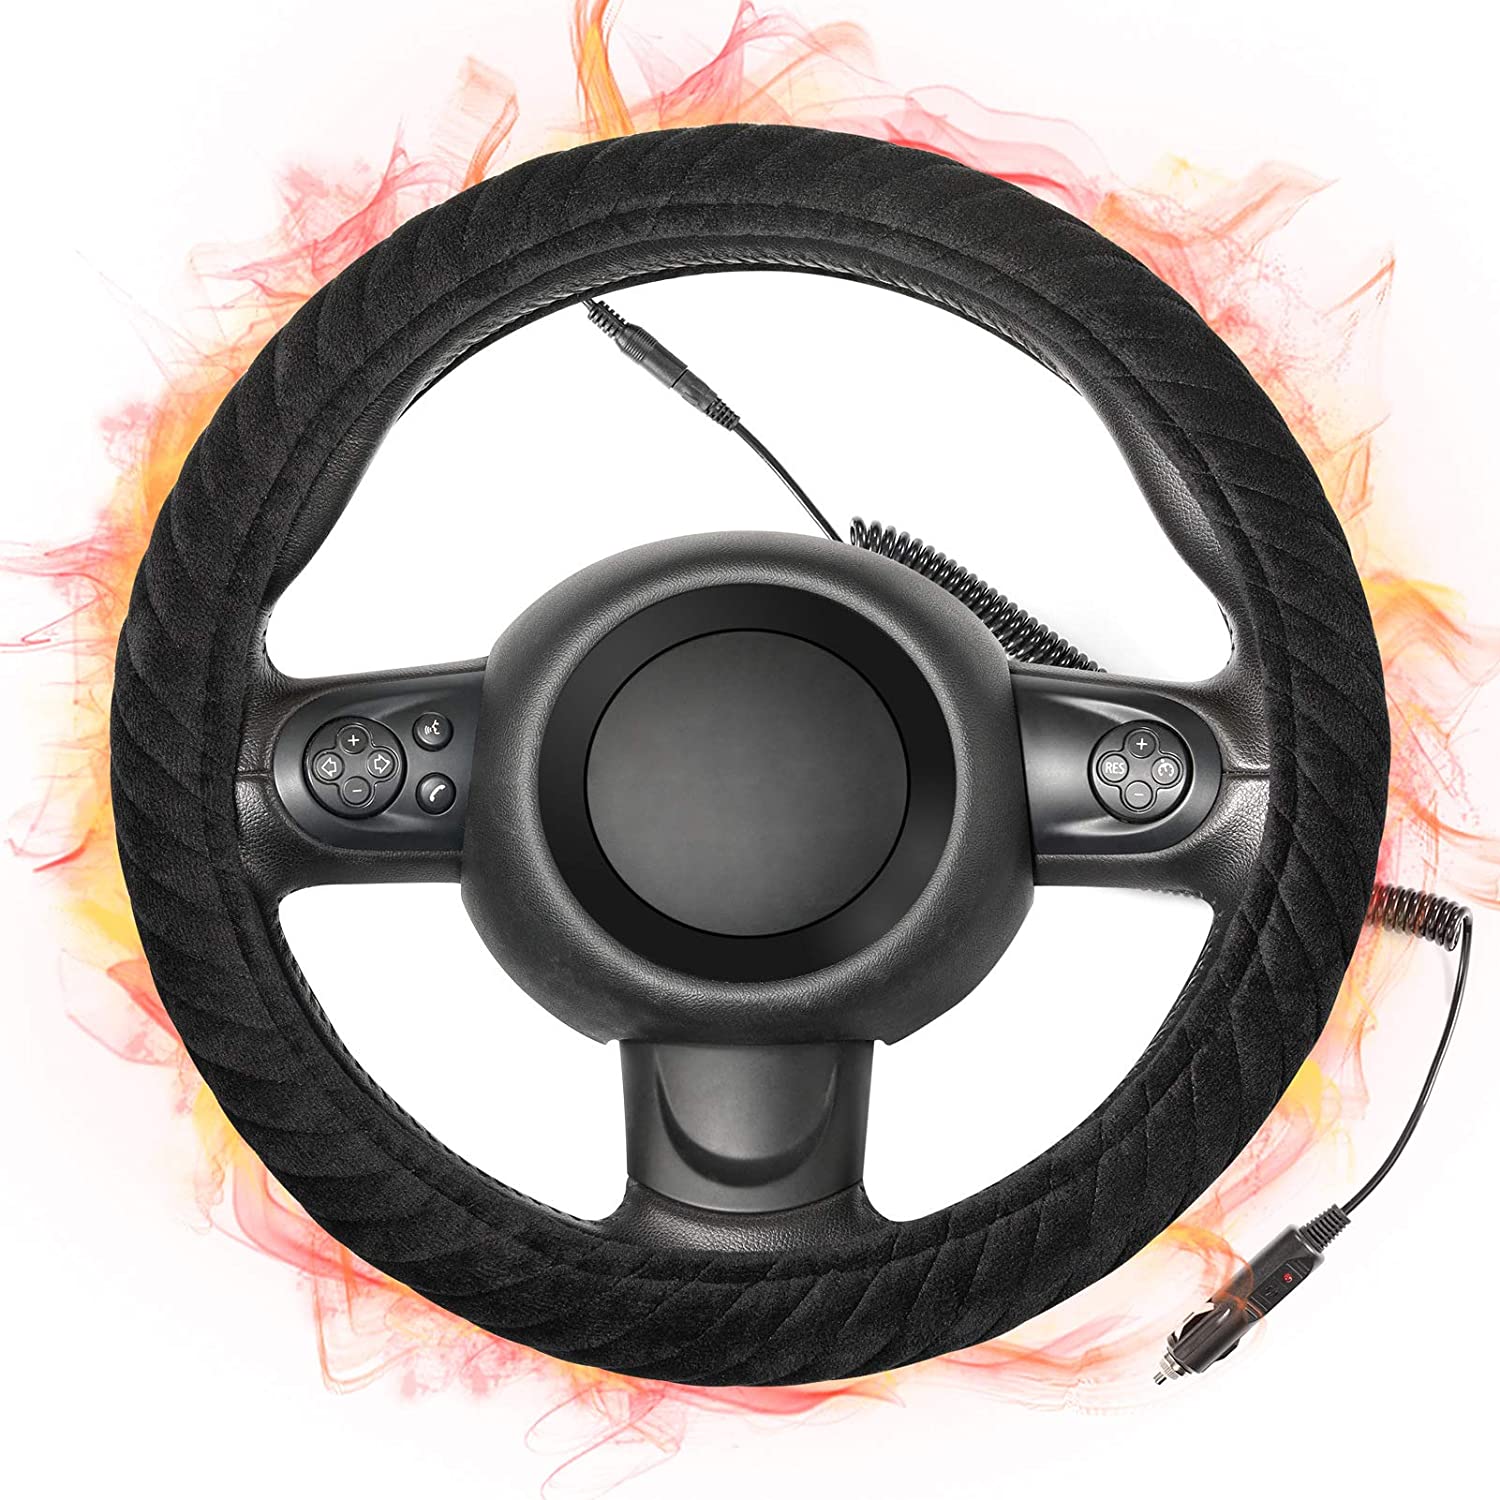 Direct Heated Steering Wheel Cover for Standard-Size